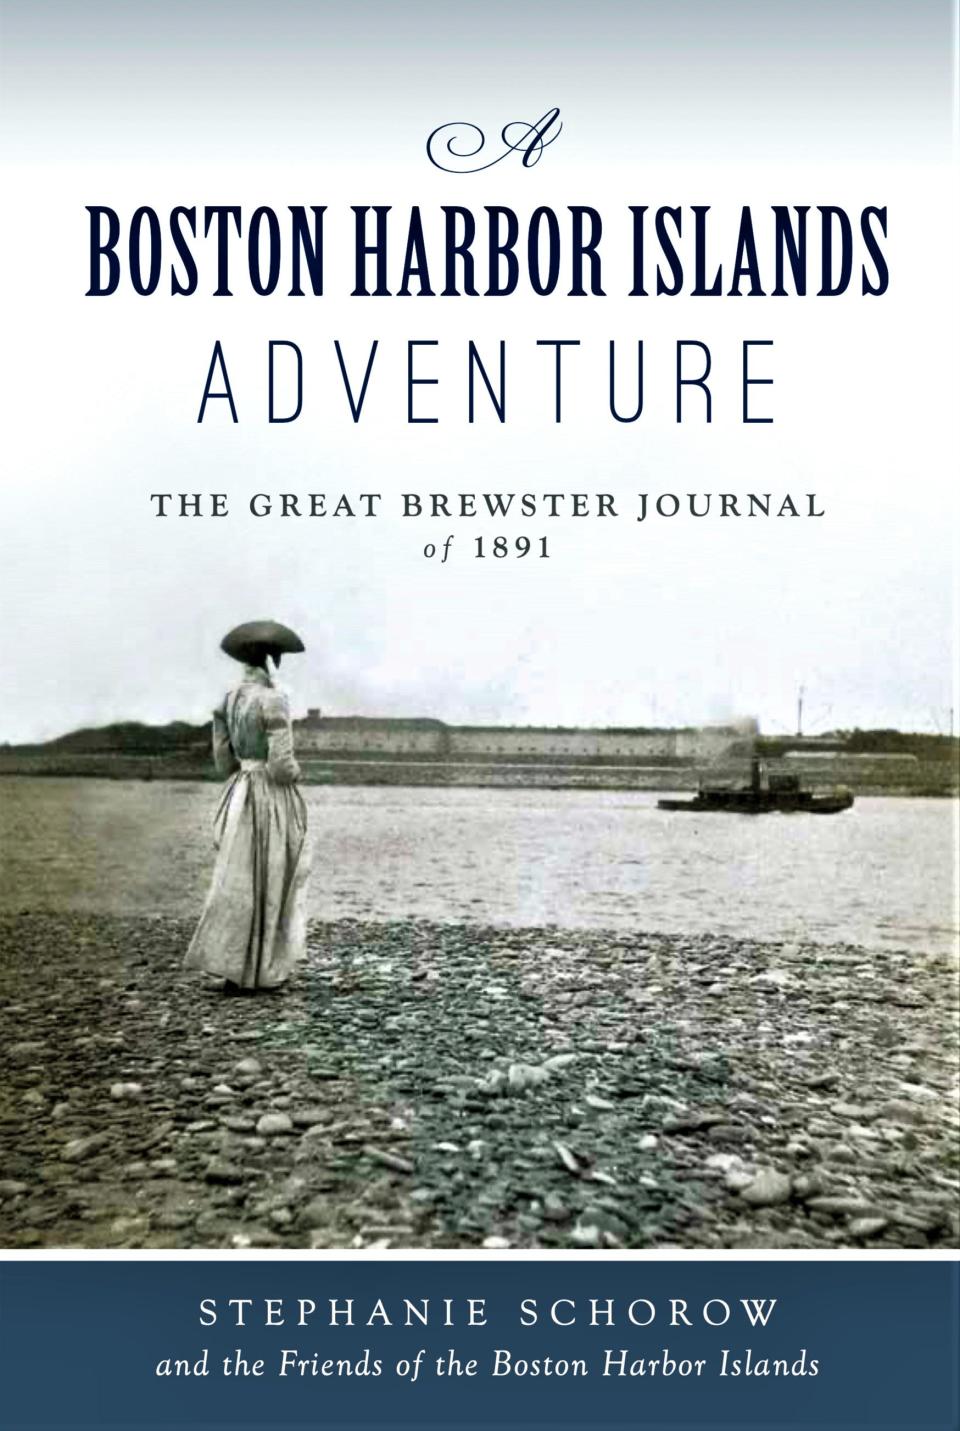 The cover of "A Boston Harbor Islands Adventure," about four 19th-century women and their bold, creative getaway in 1891.